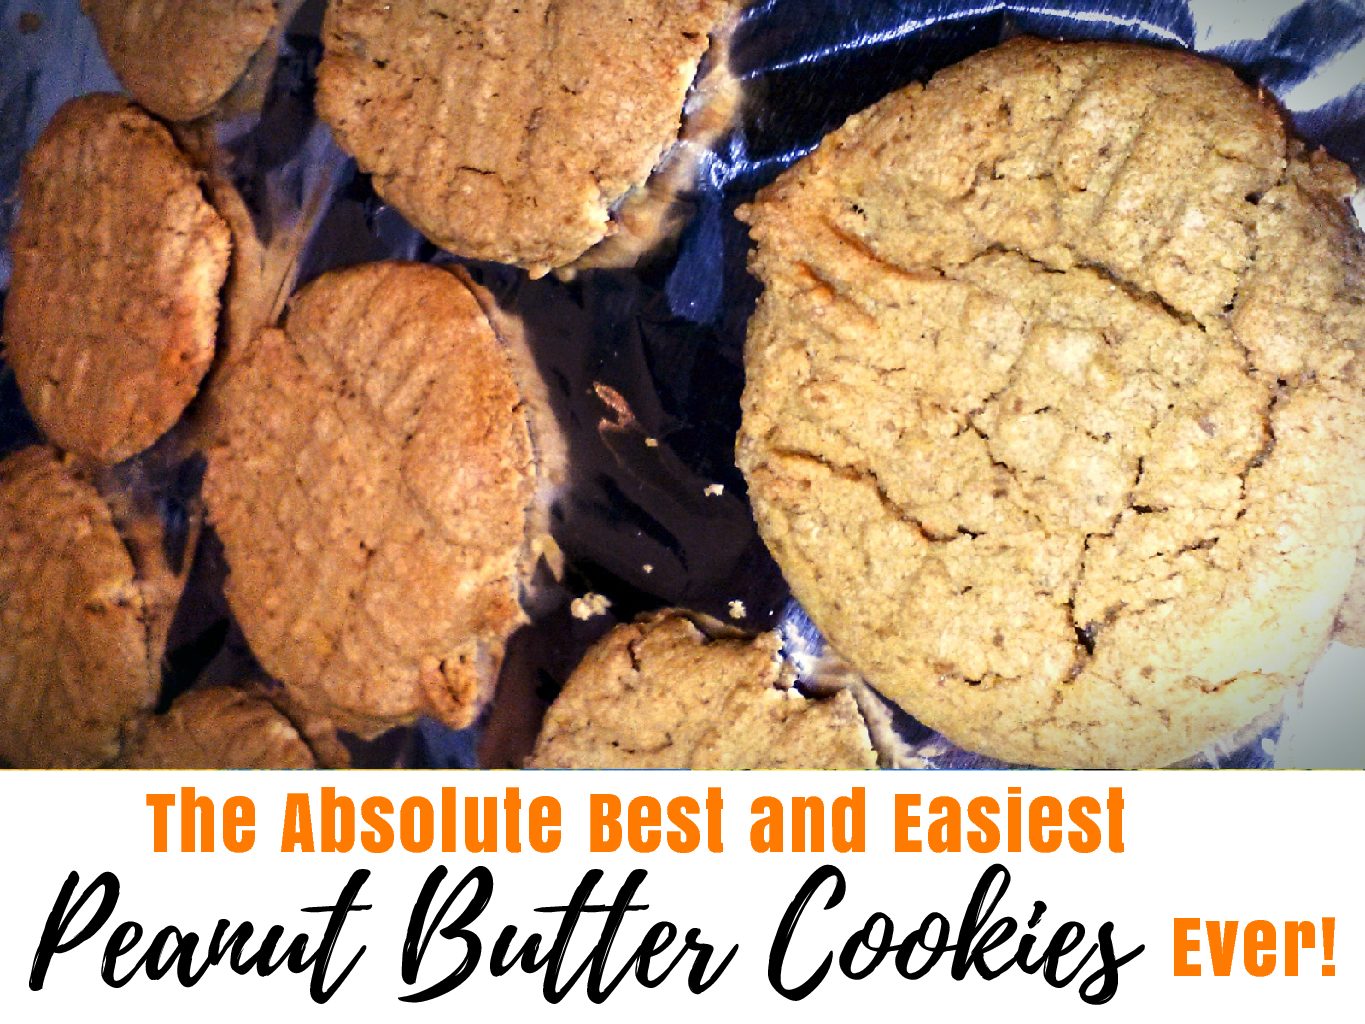 The Absolute Best and Easiest Peanut Butter Cookies Ever